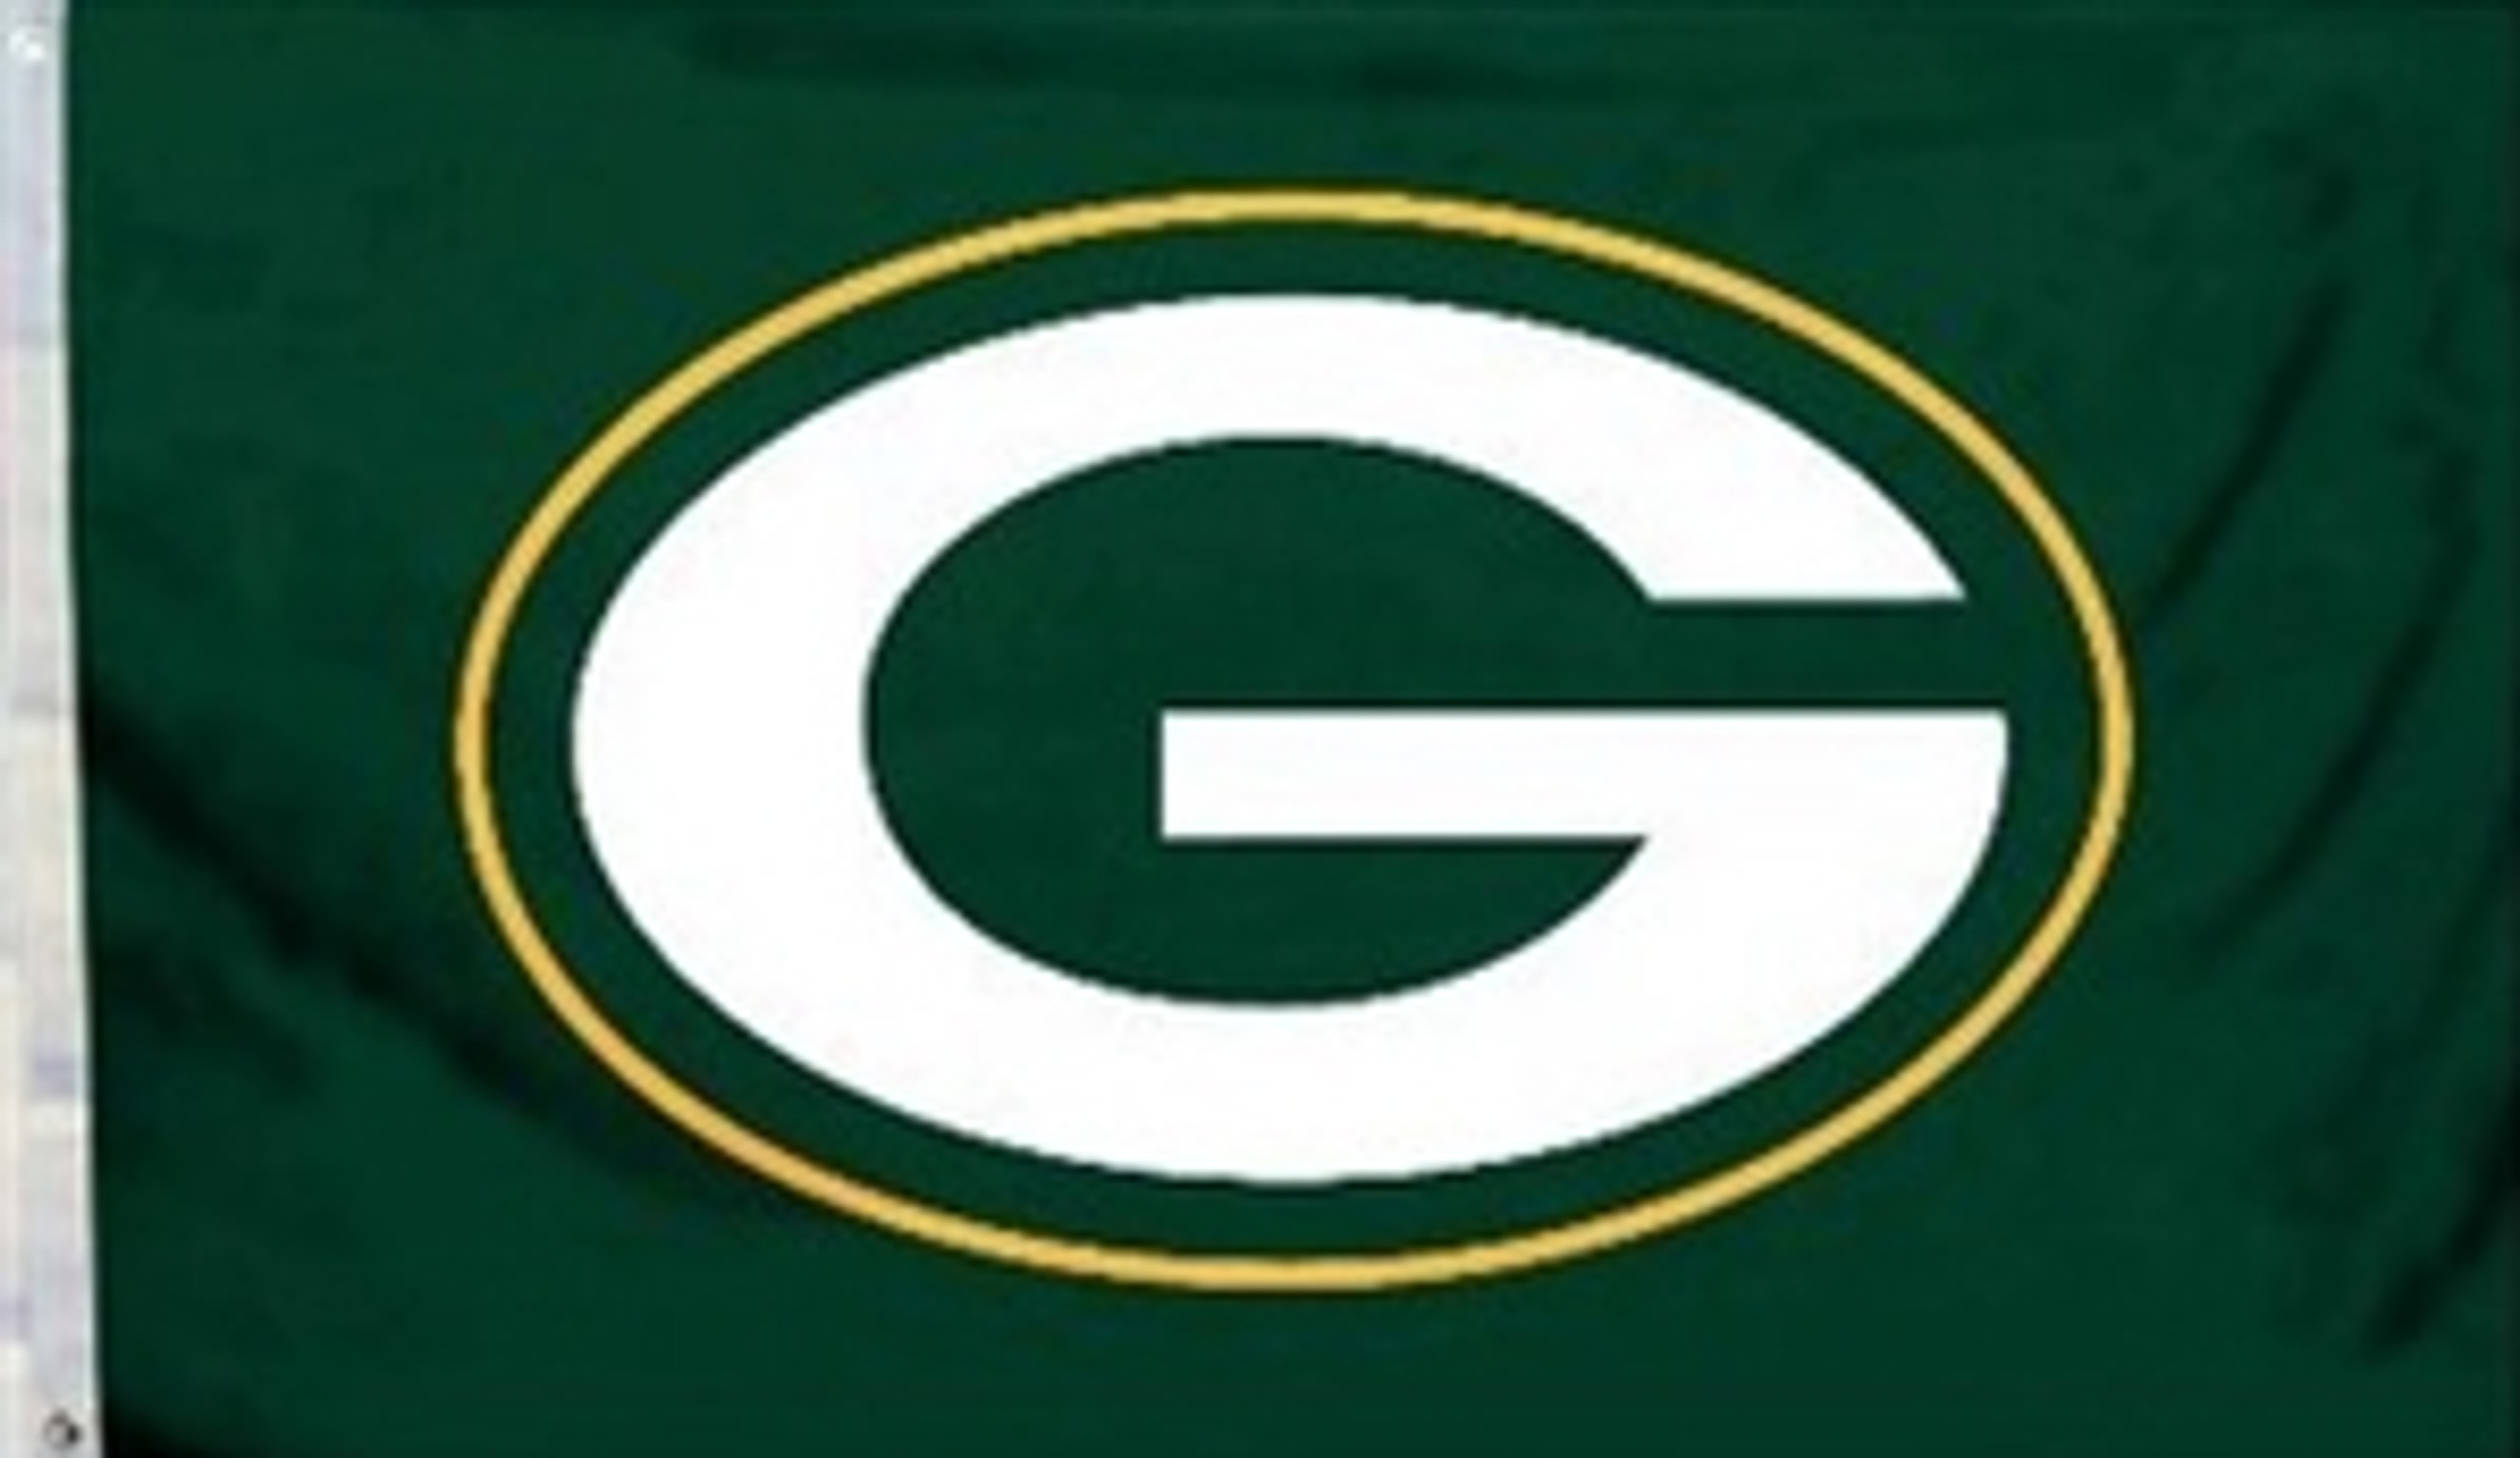 Green Bay Packers Logo Flag - 3' x 5' | American Flags Express